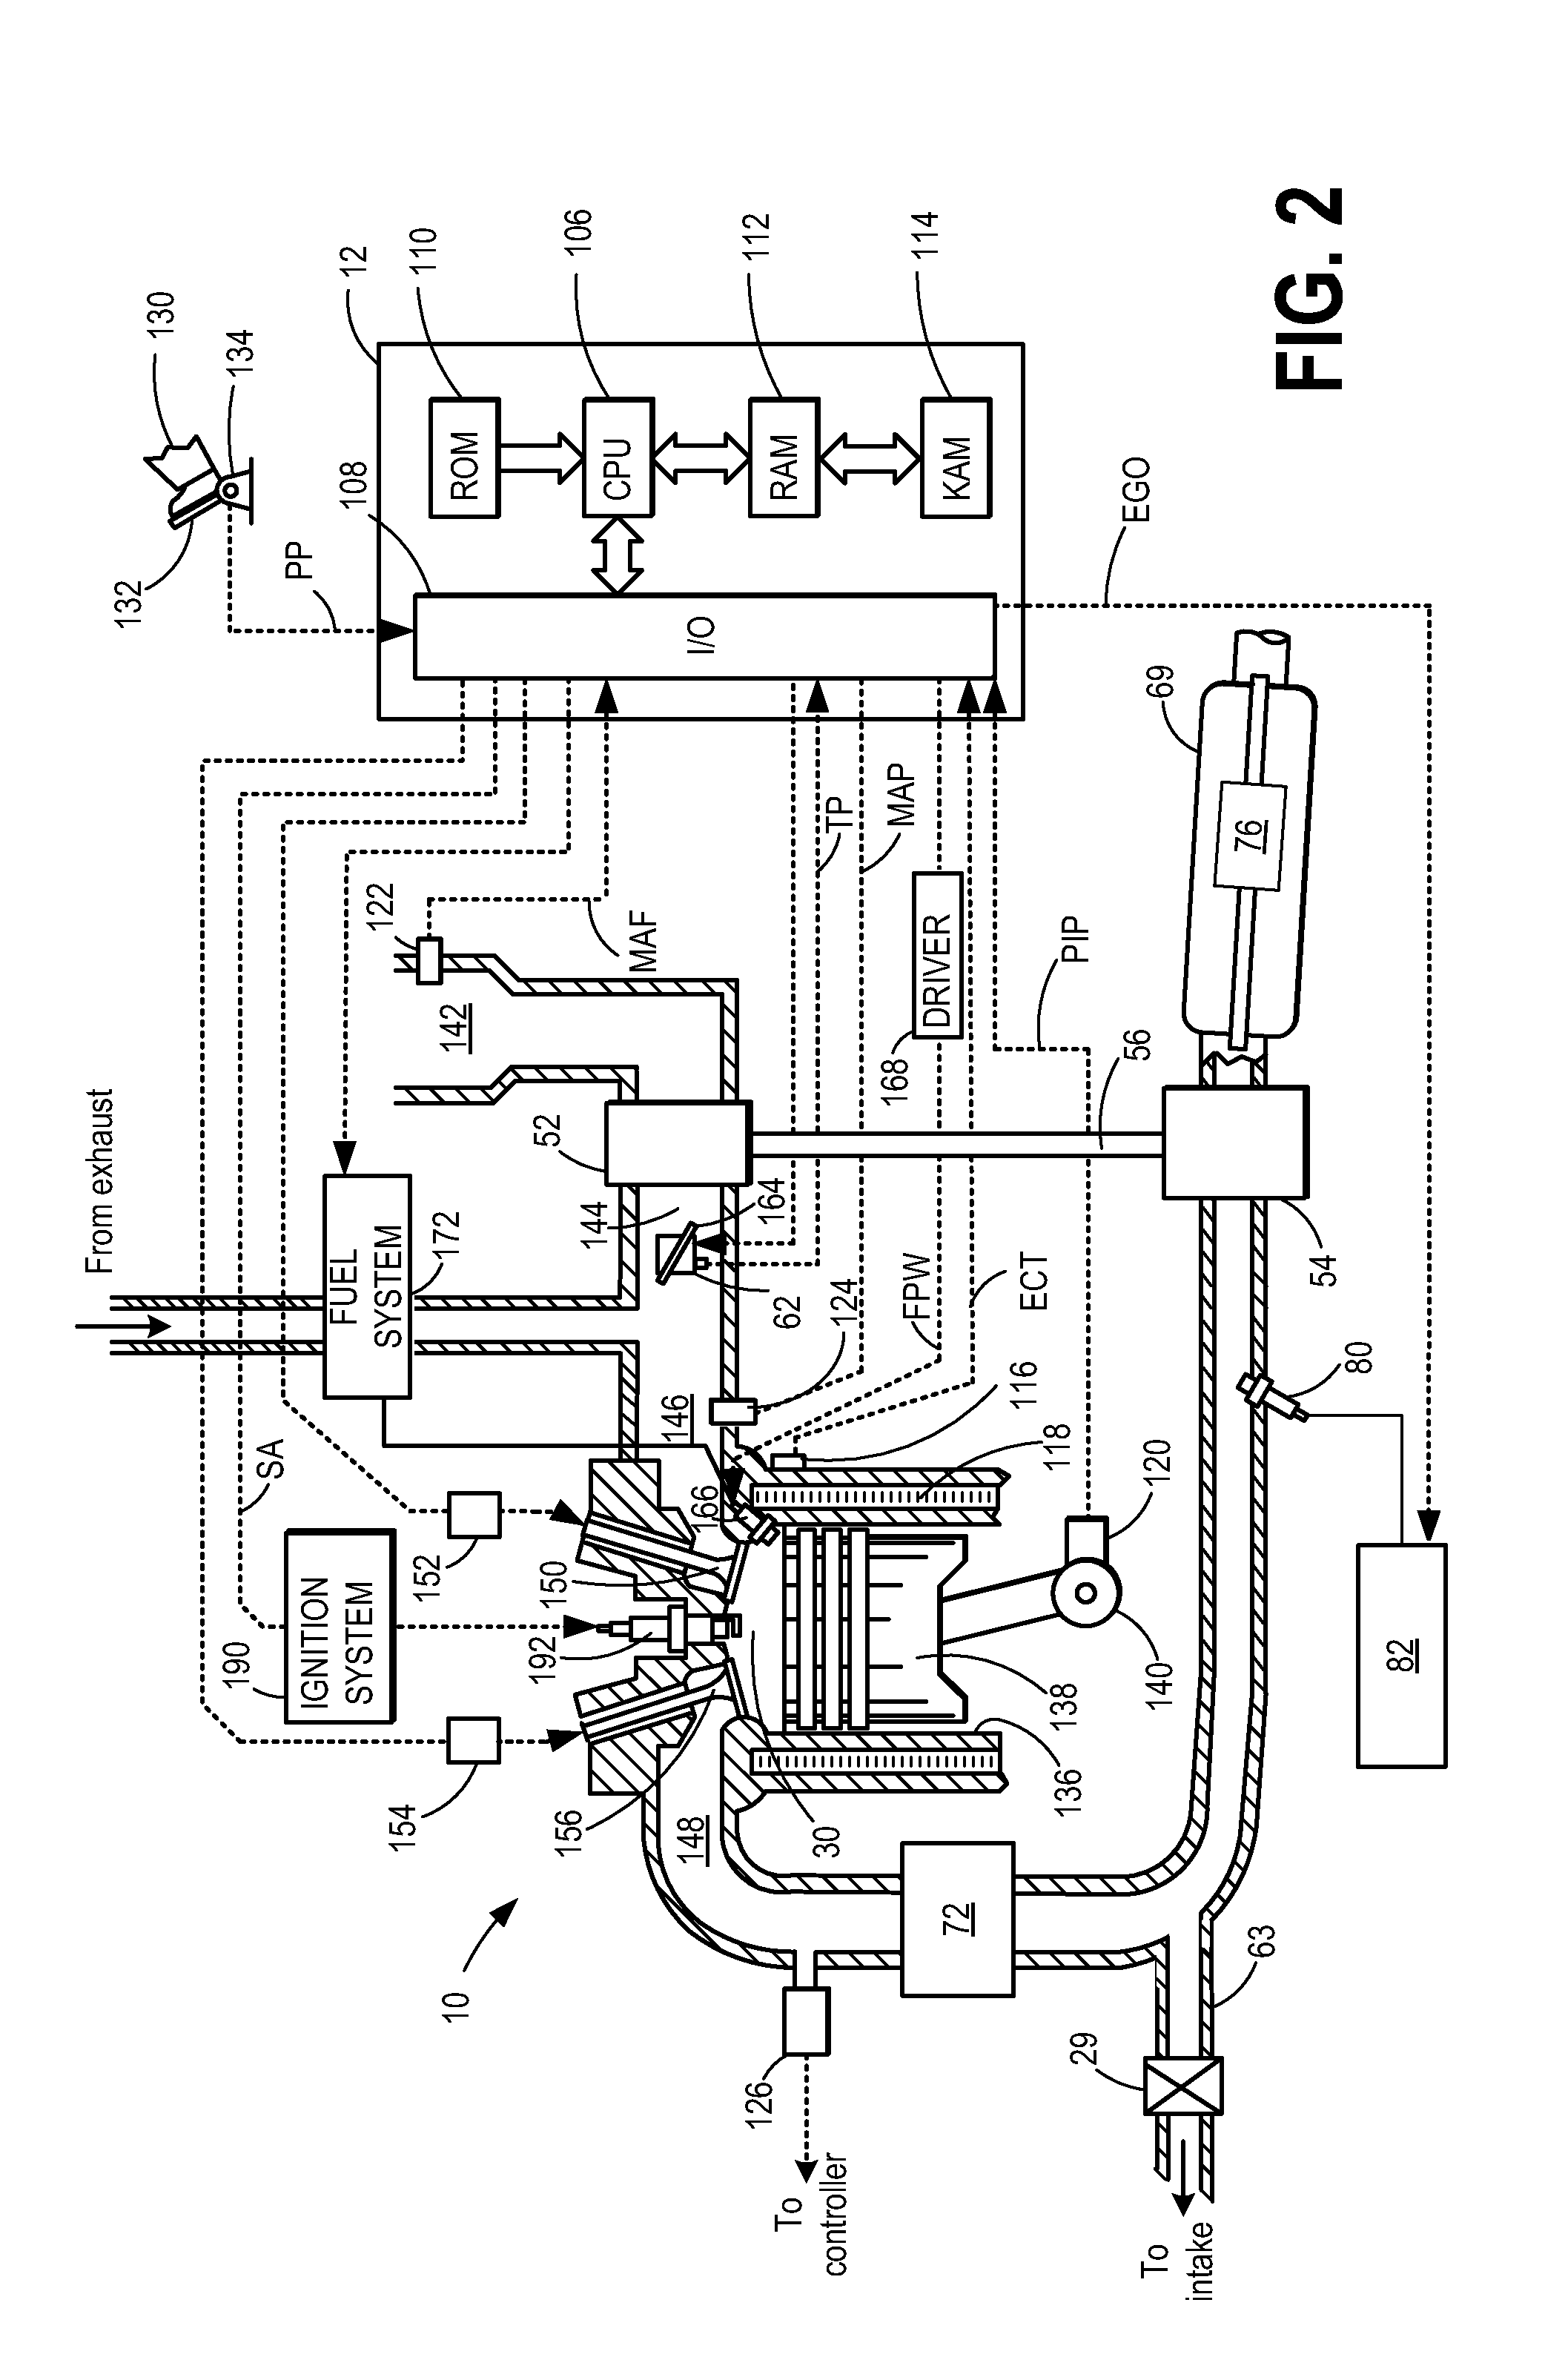 Methods and Systems for Emission System Control